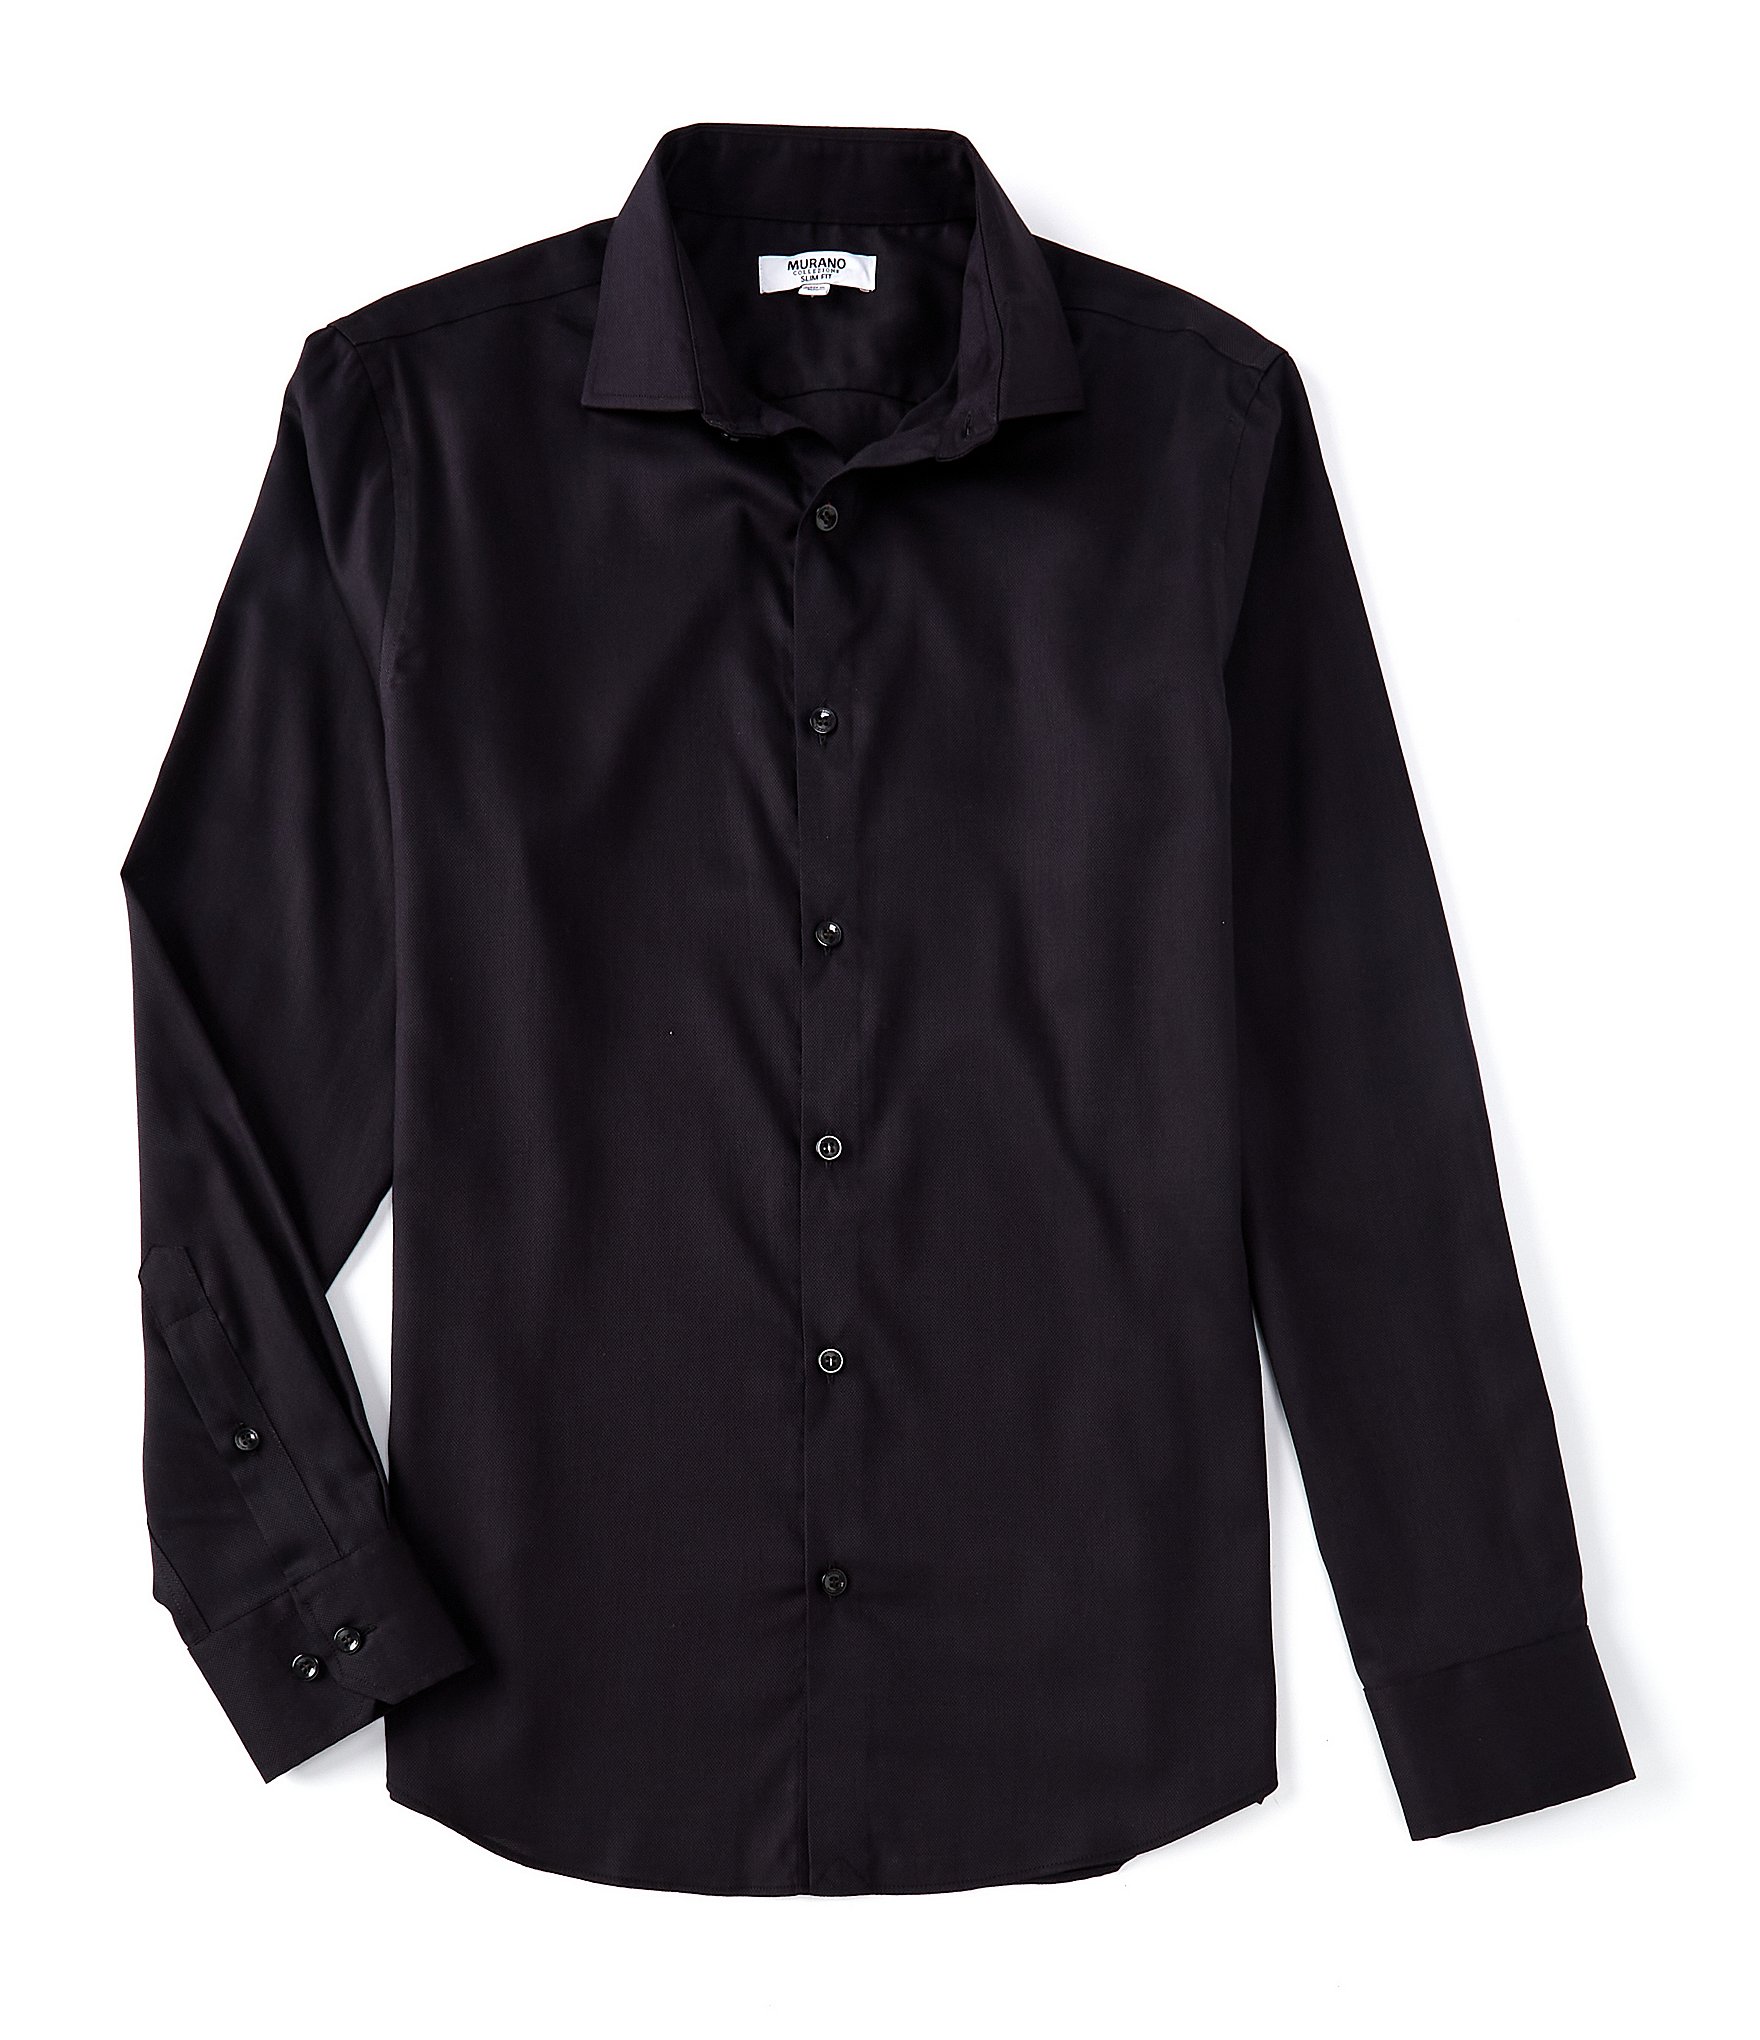 Murano Collezione Slim-Fit Solid Long-Sleeve Woven Shirt | Dillard's